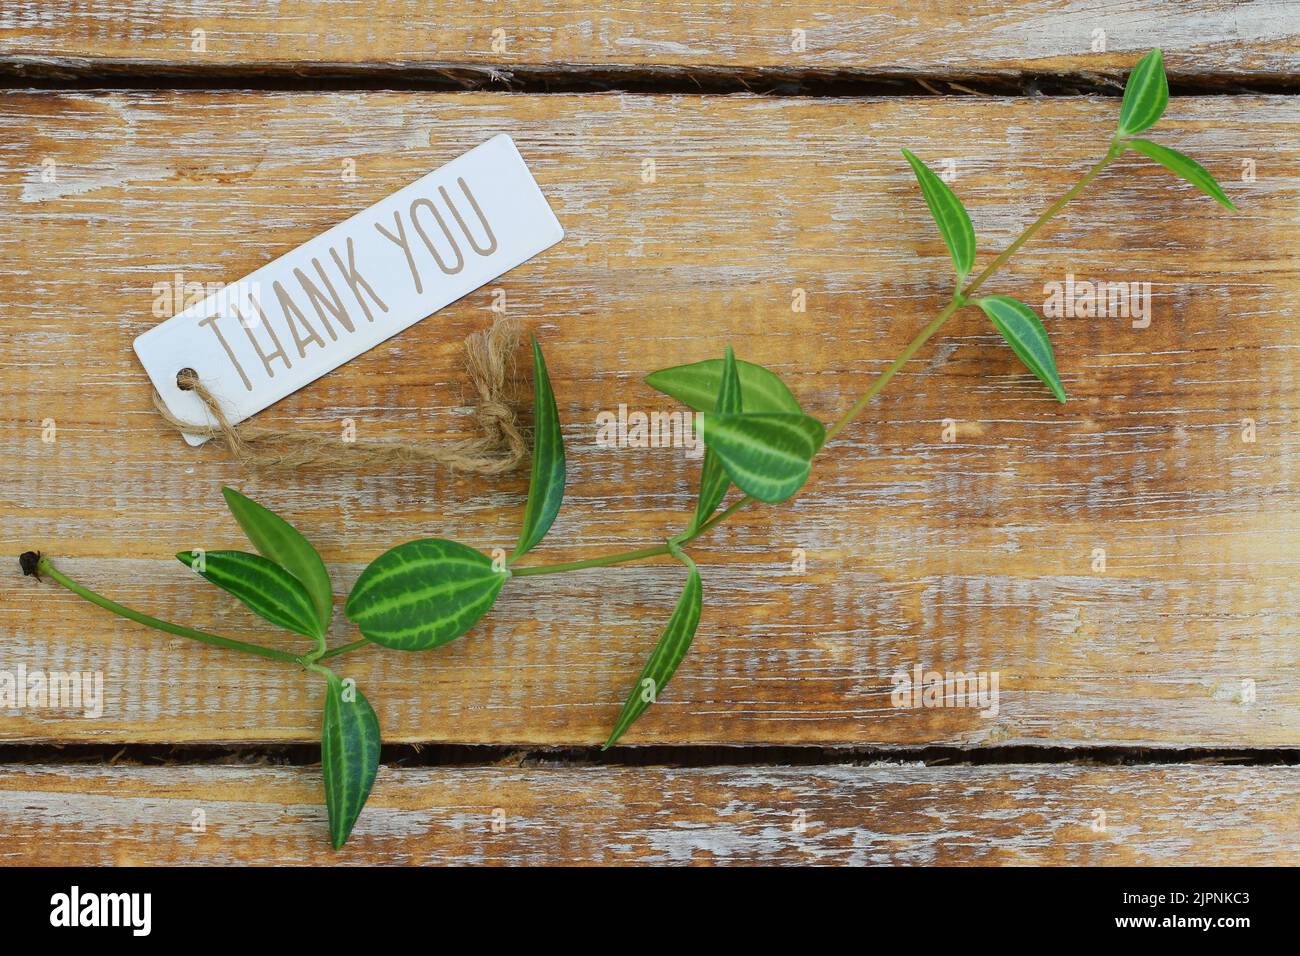 Thank you tag with green leaves on rustic wooden surface Stock Photo